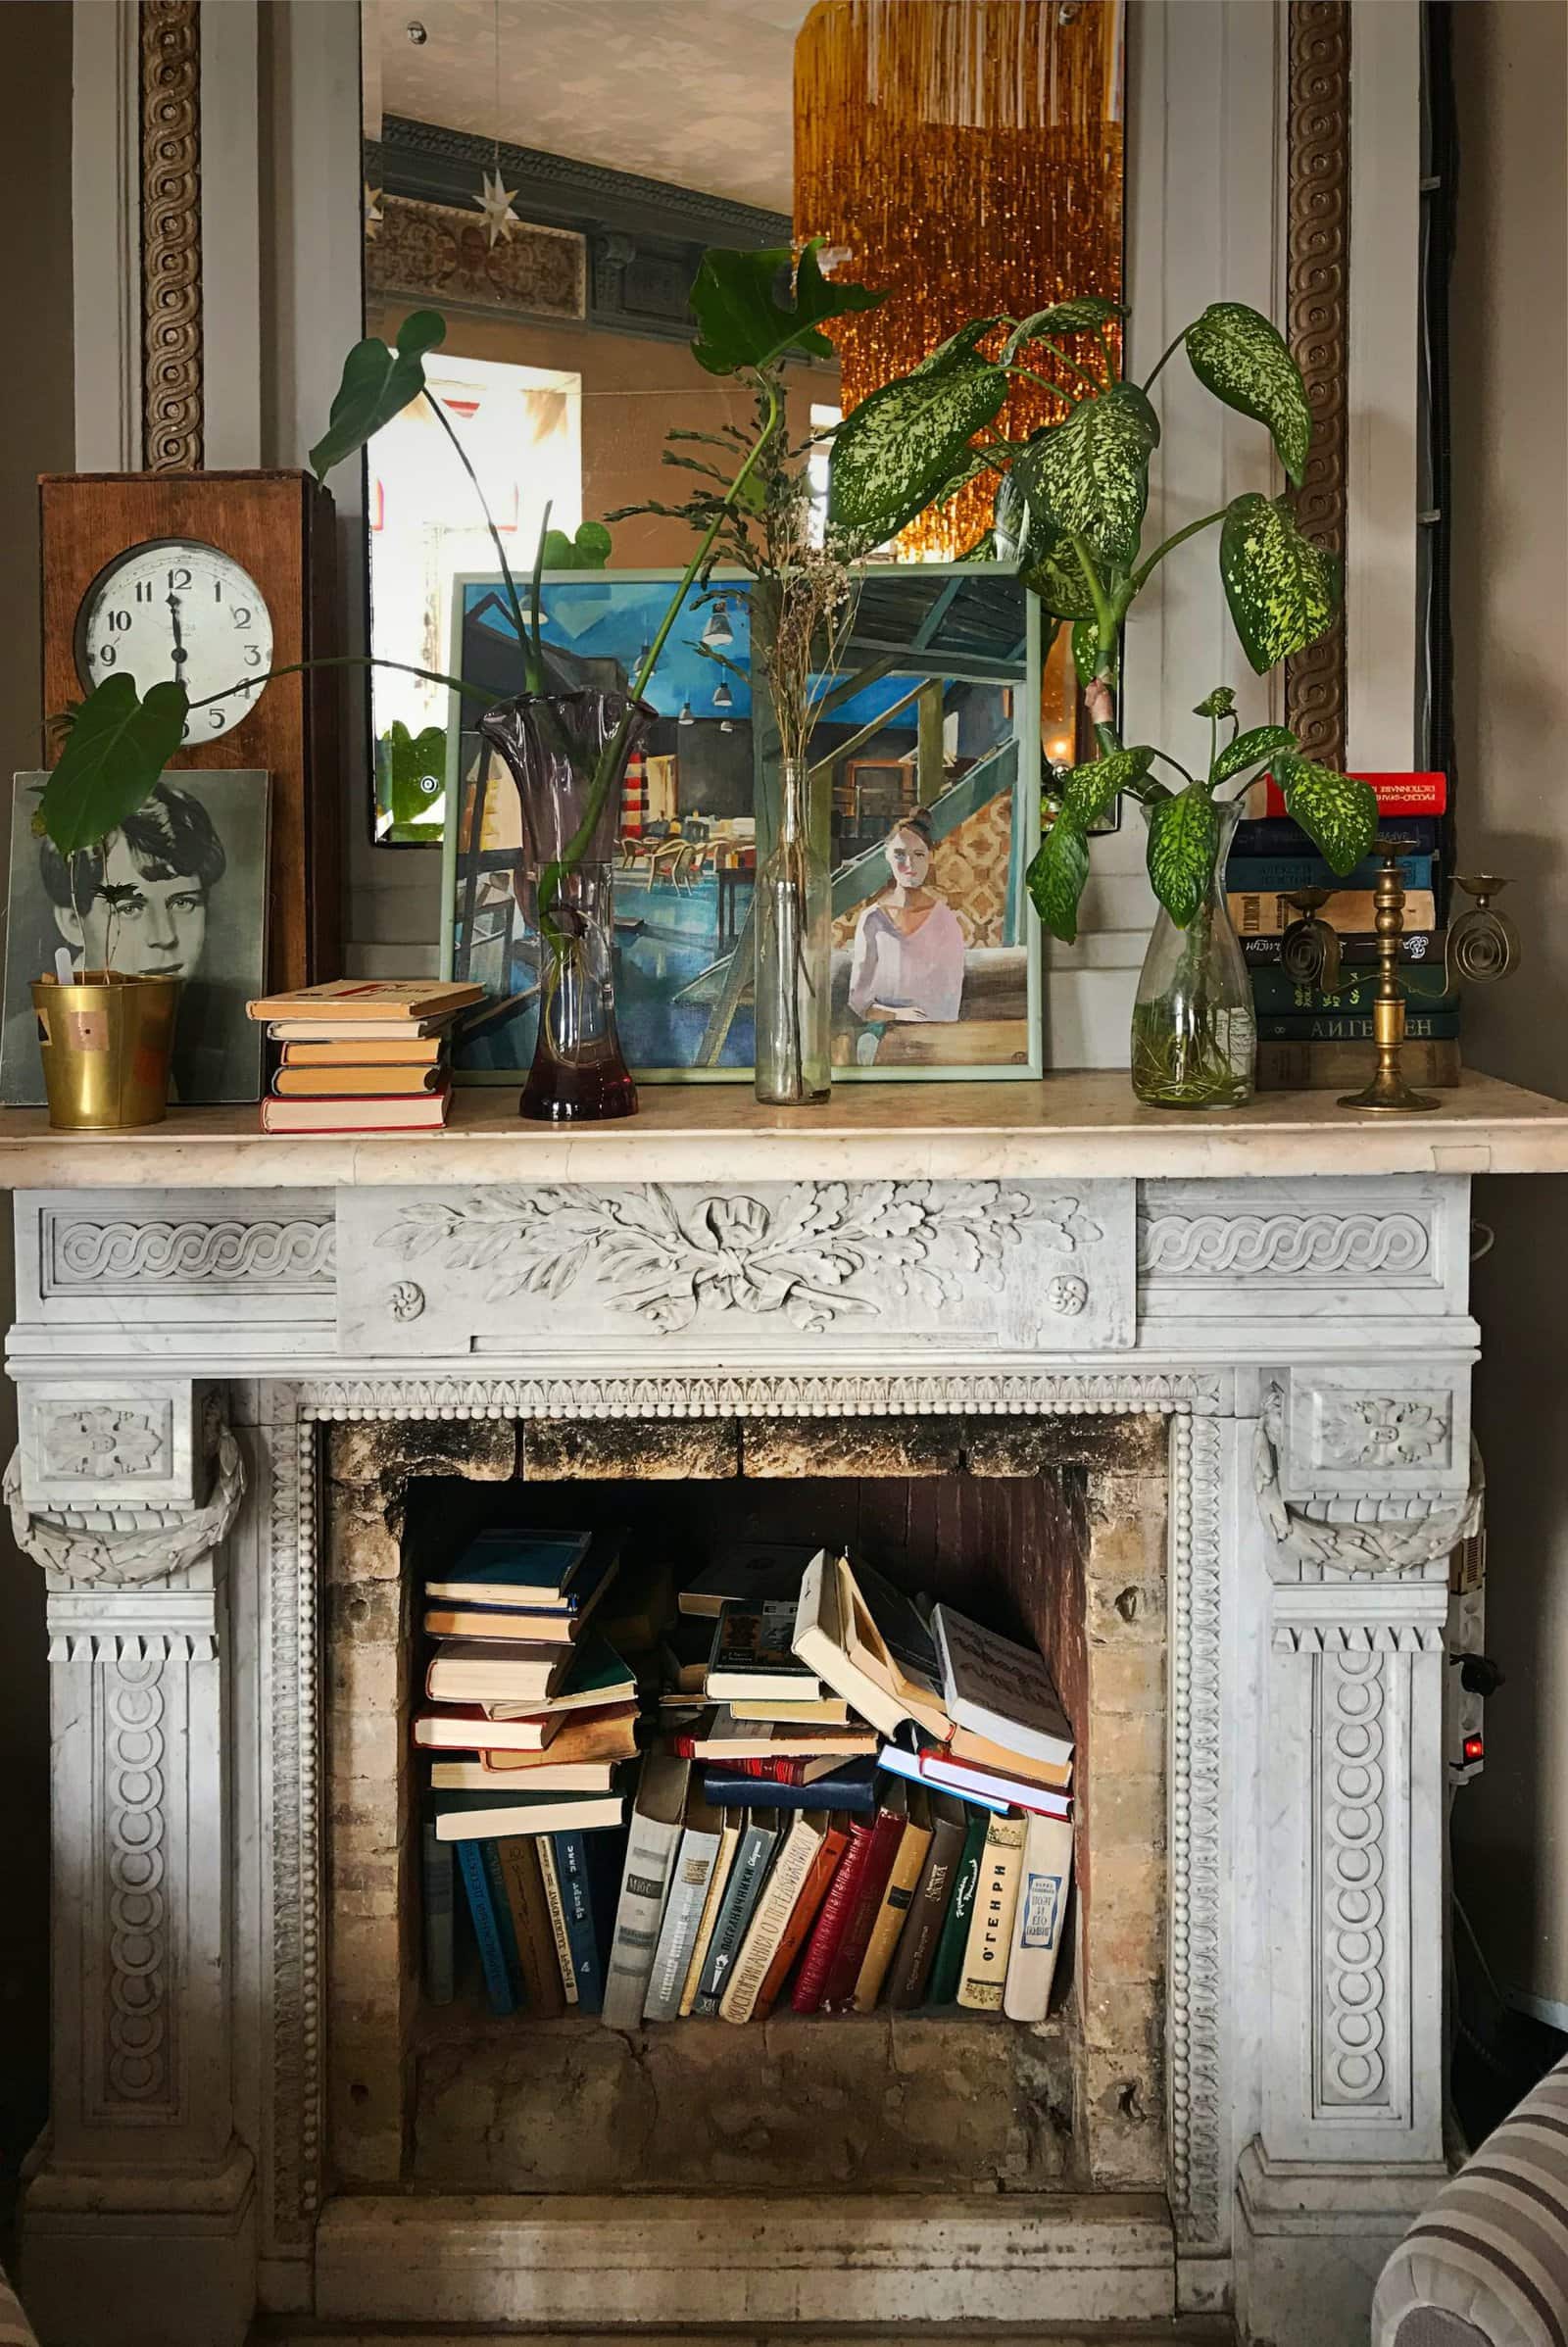  Fireplace with books scaled